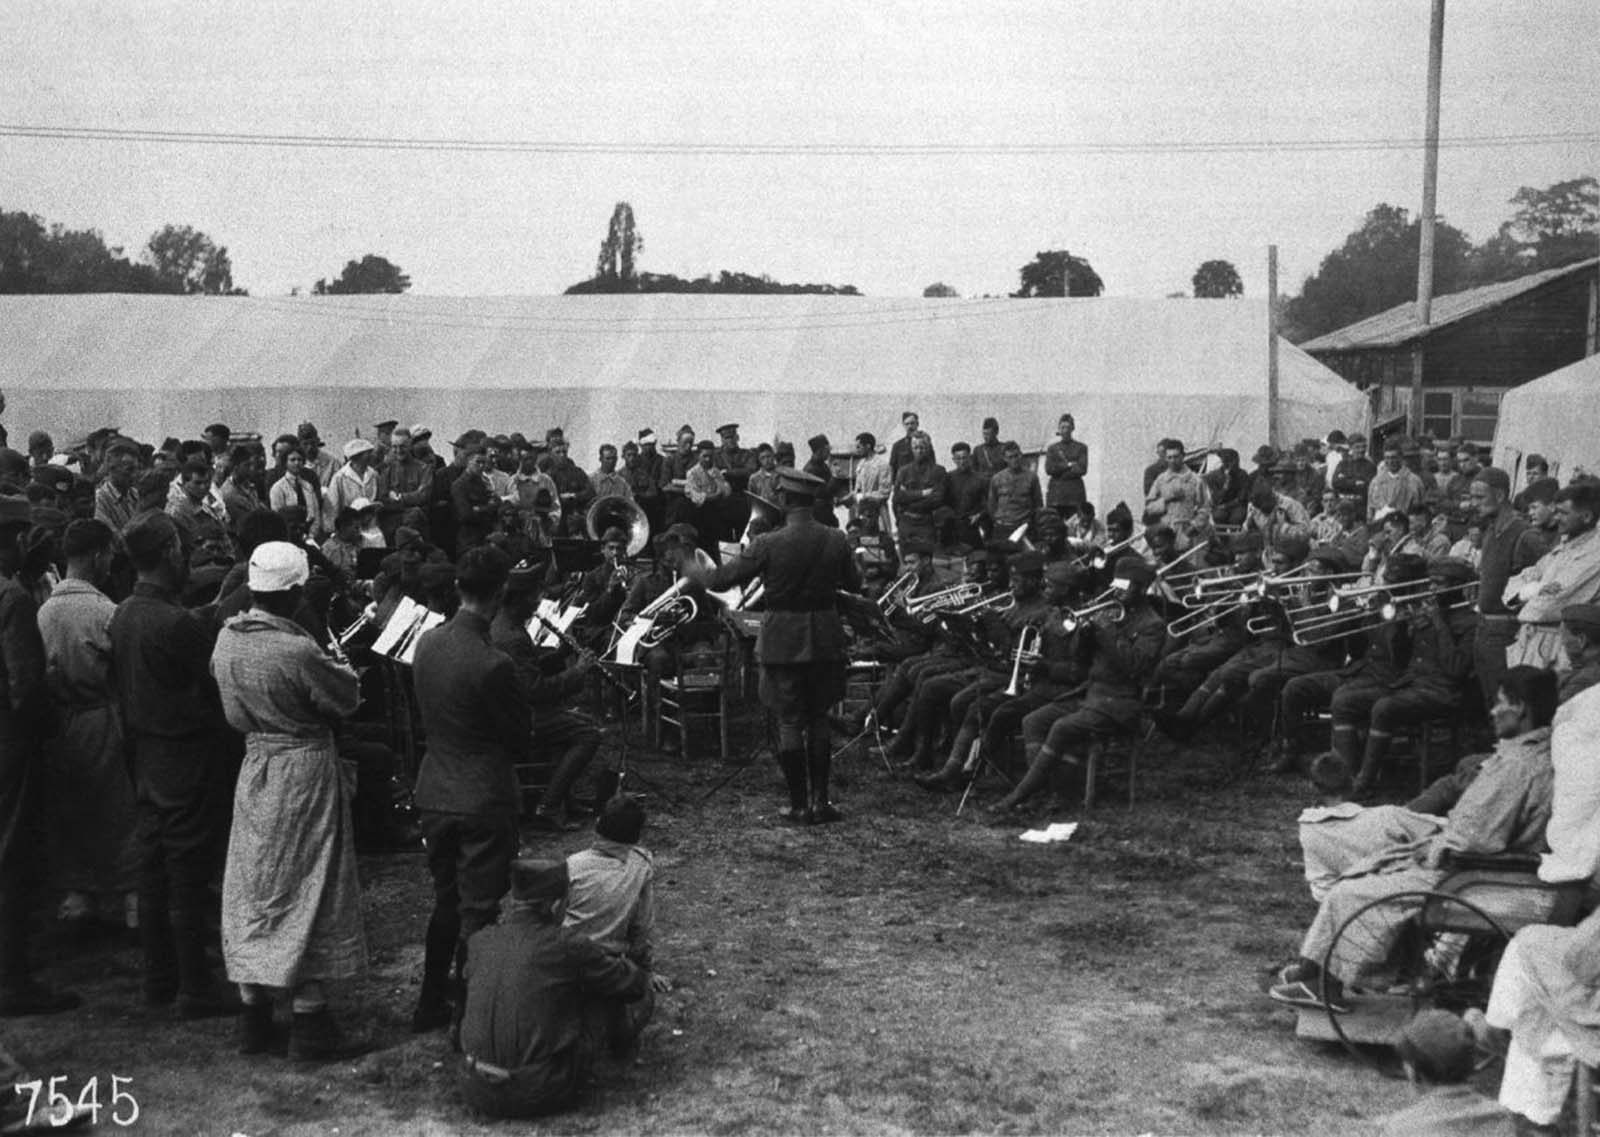 Members of the 369th Infantry band perform at an American Red Cross hospital in Paris.